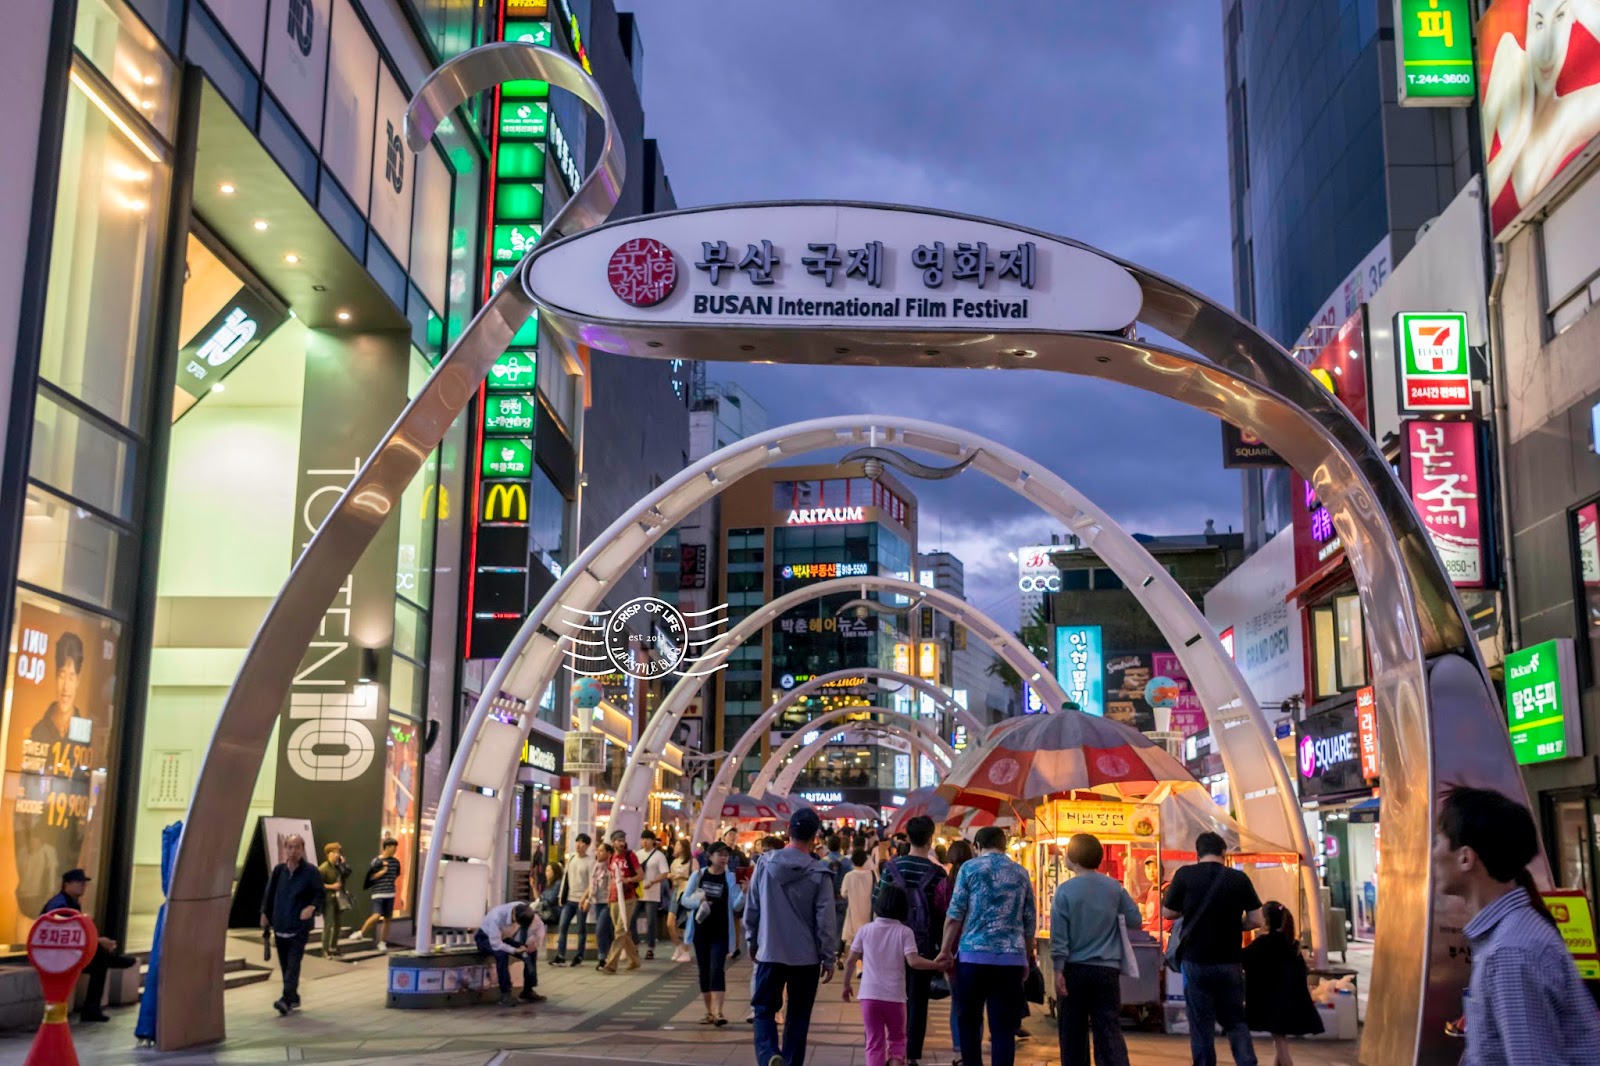 Busan 3 Days Itinerary - What Things to Do and See